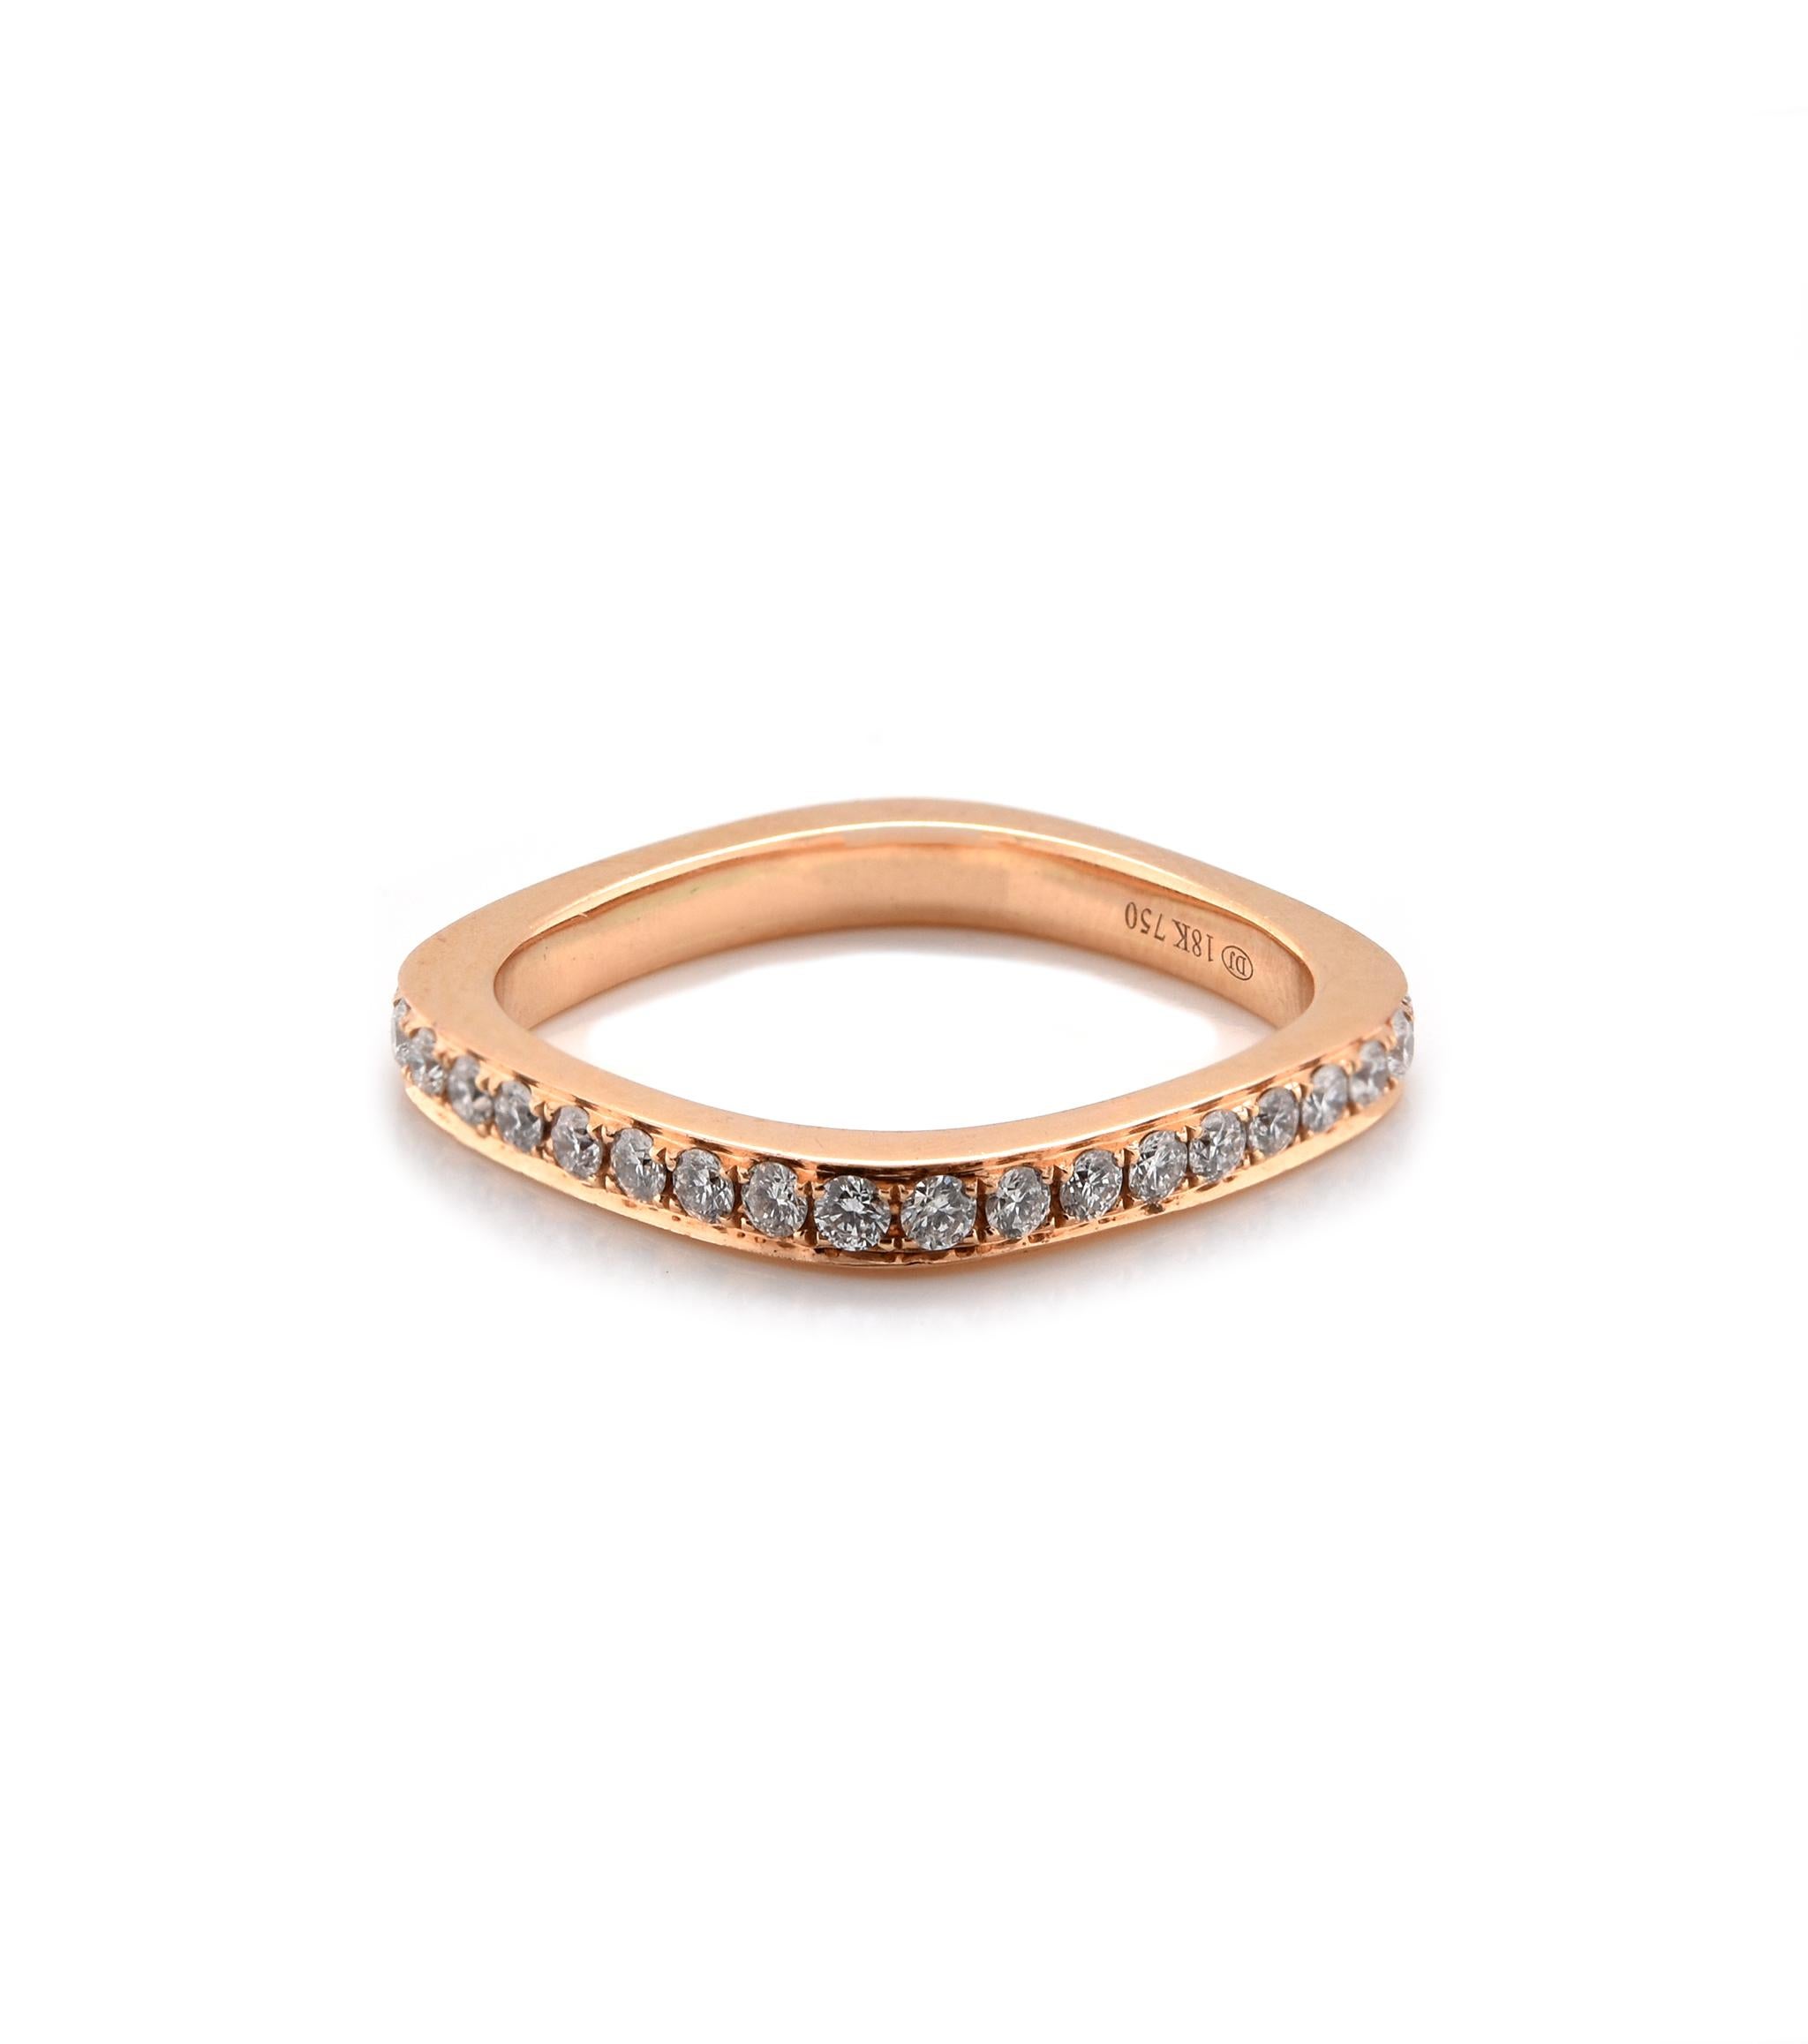 Designer: Custom
Material: 18K rose gold
Diamonds: 36 round cut = .64cttw
Color: G
Clarity: VS2
Size: 7
Dimensions: ring measures 2.7mm in width
Weight: 3.21grams
